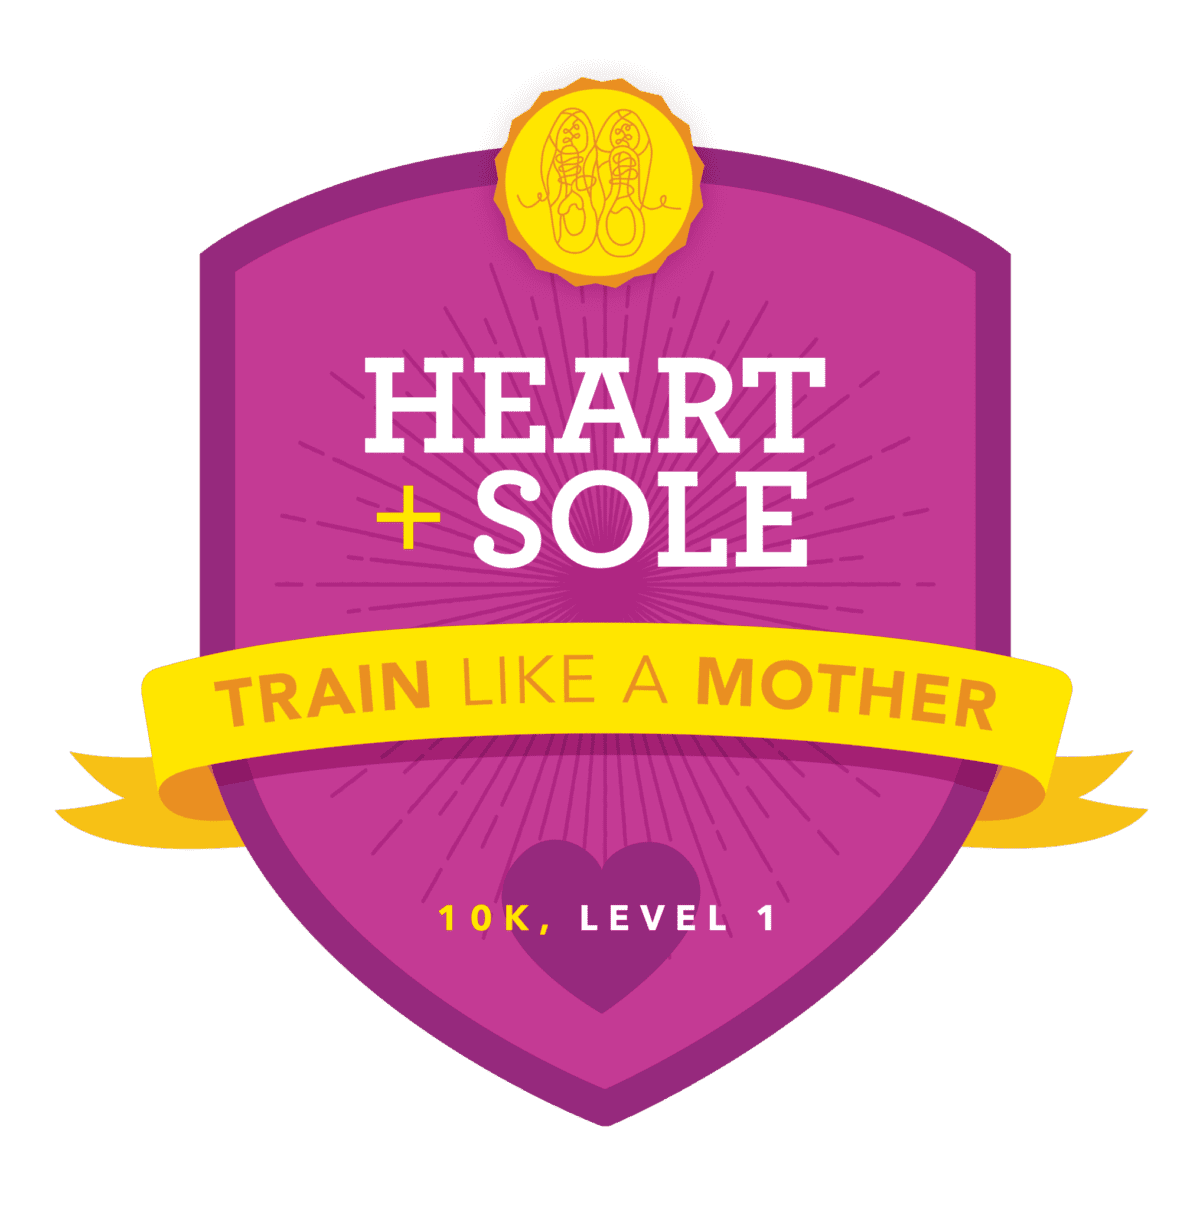 Running by Heart Rate 10K Training Program Train Like a Mother Club